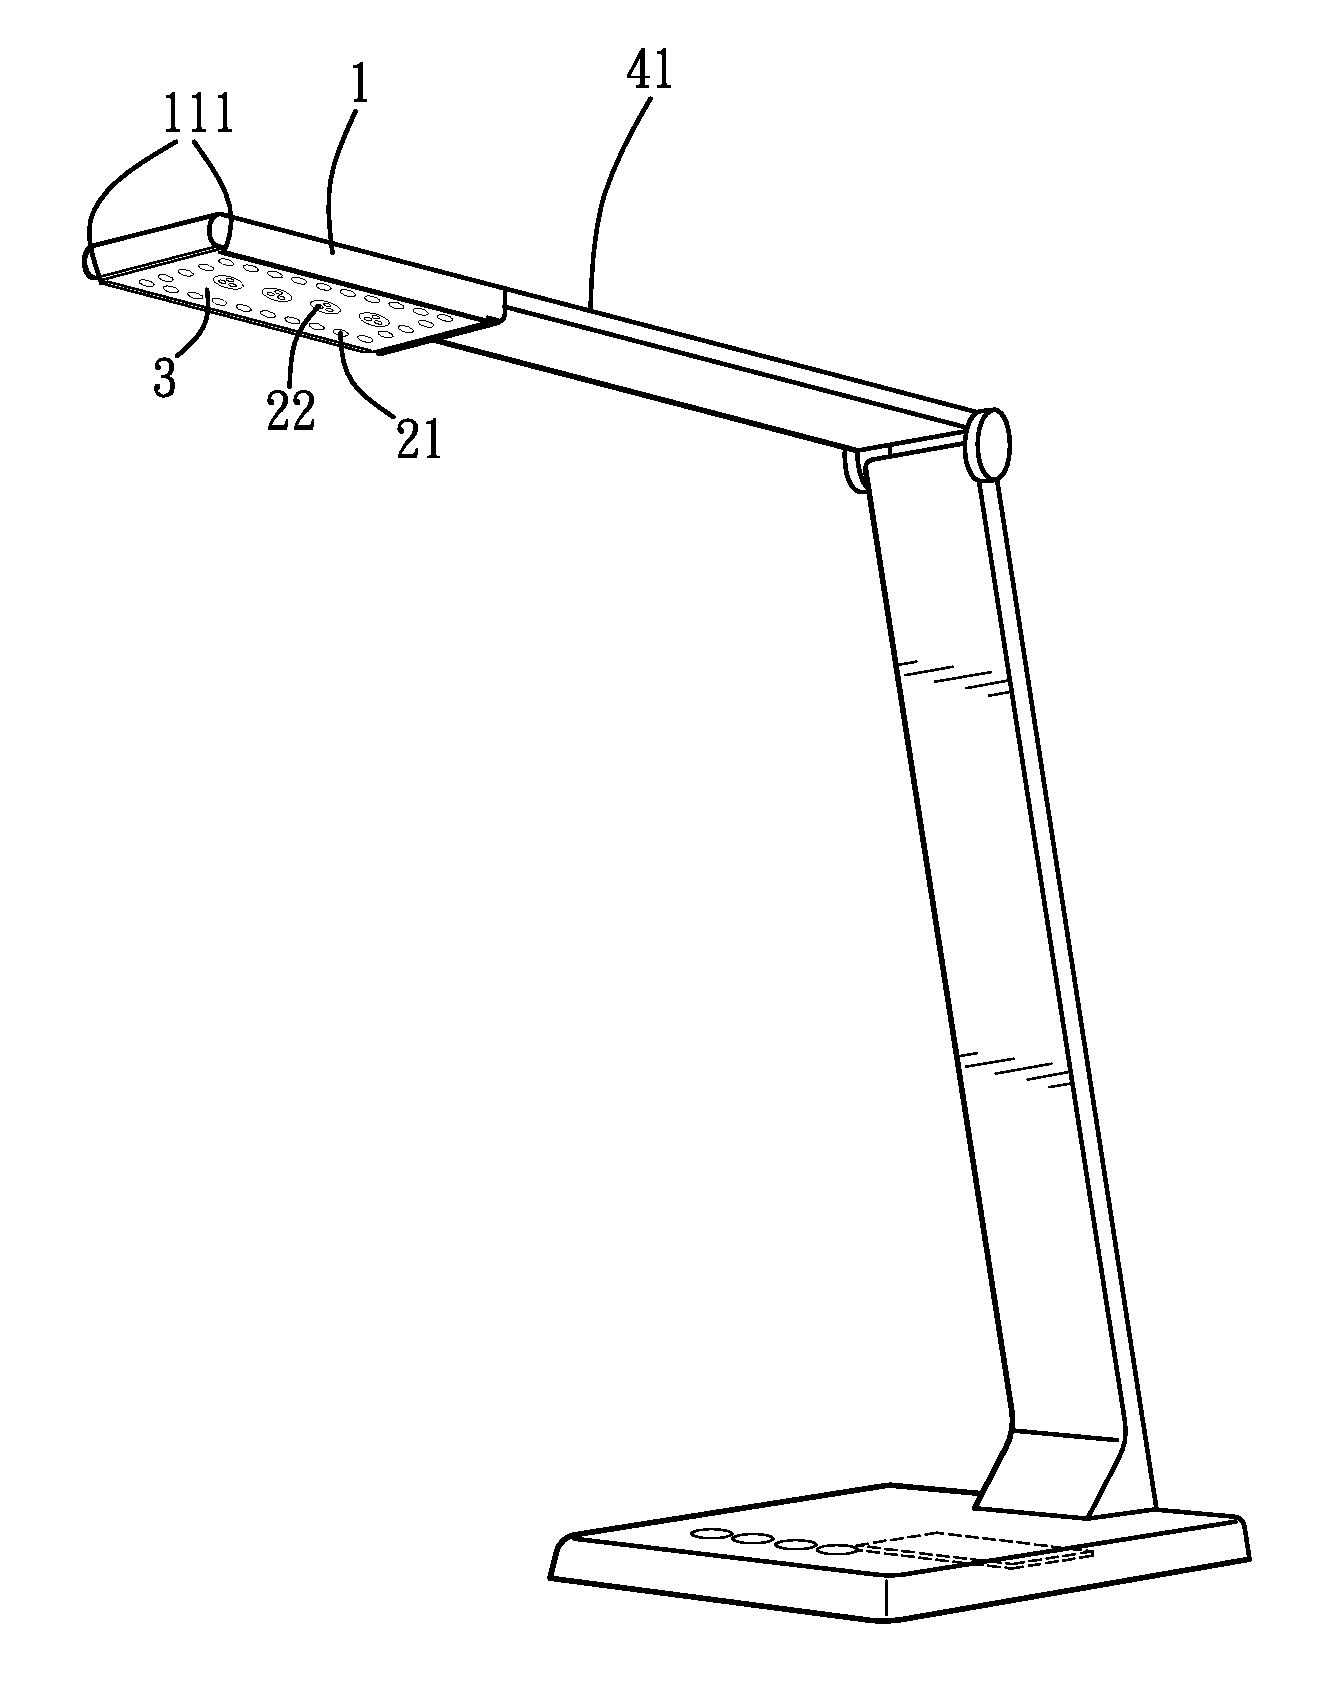 Table lamp with an adjustable projecting area